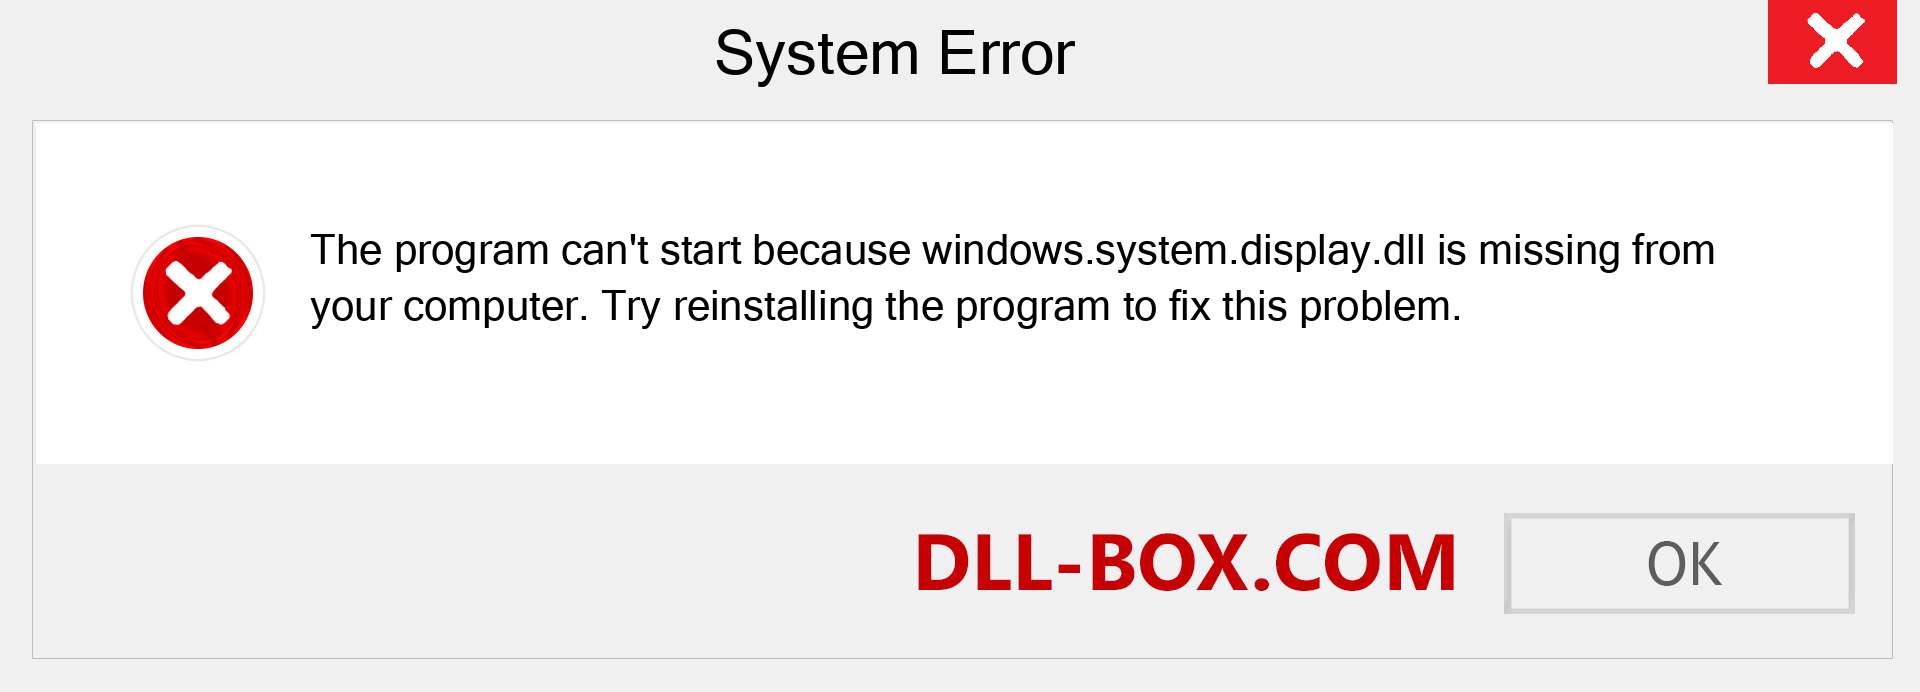  windows.system.display.dll file is missing?. Download for Windows 7, 8, 10 - Fix  windows.system.display dll Missing Error on Windows, photos, images